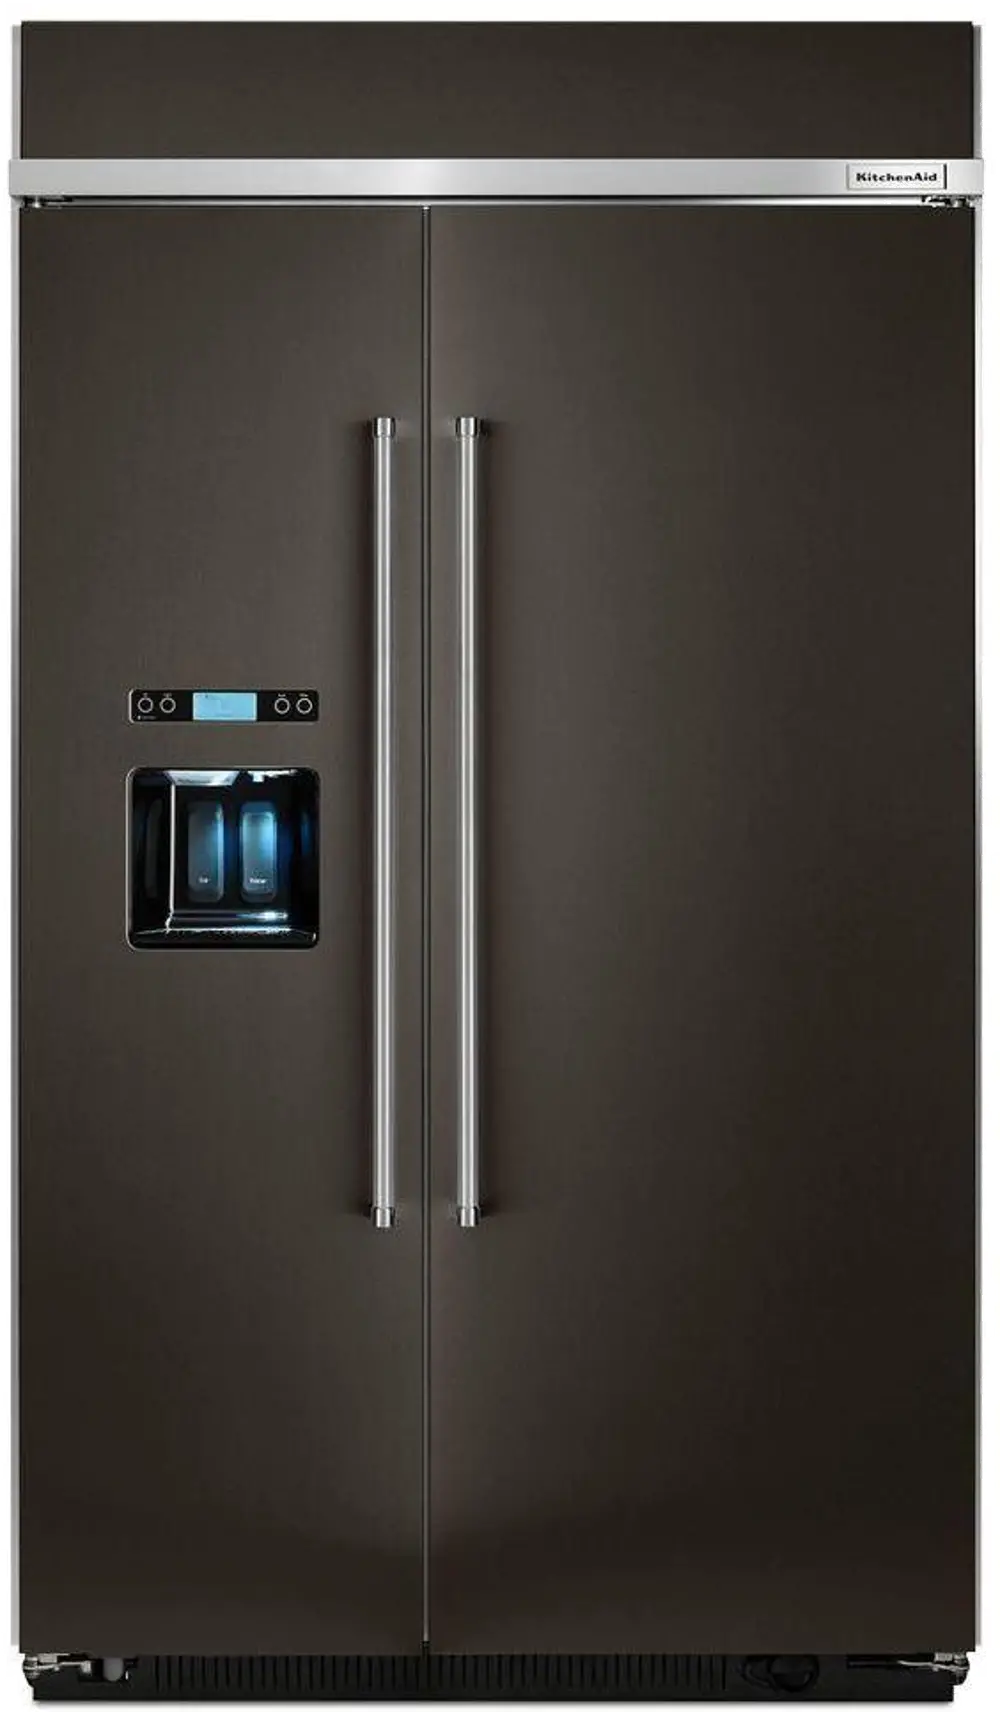 KBSD608EBS KitchenAid Built in Side by Side Refrigerator - 29.5 cu. ft., 48 Inch Black Stainless Steel-1